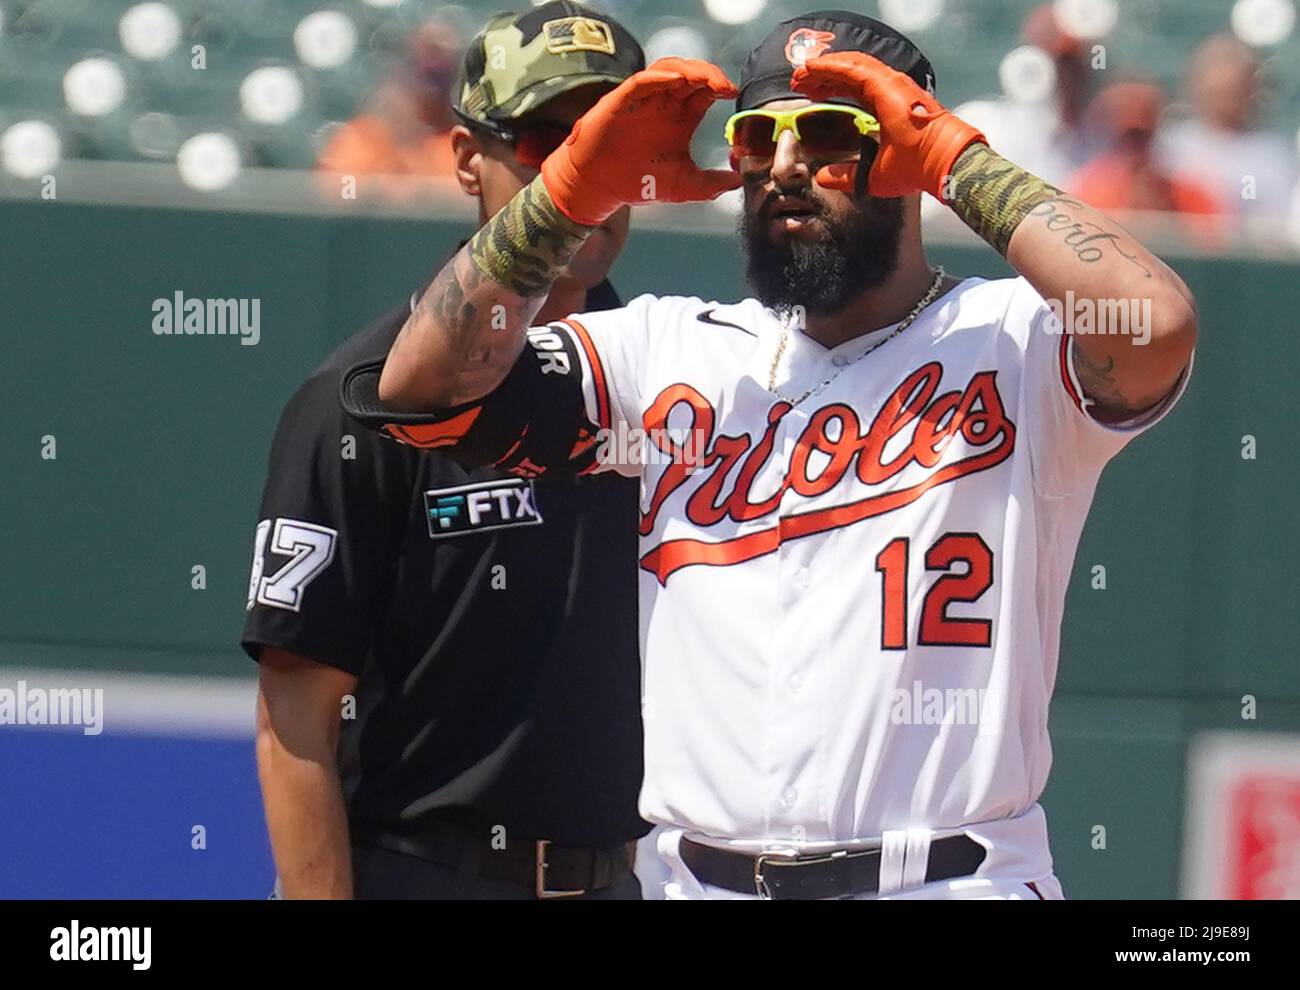 BALTIMORE, MD - MAY 22: Baltimore Orioles second baseman Rougned Odor (12)  adjusted his glasses on second base during a MLB game between the Baltimore  Orioles and the Tampa Bay Rays, on